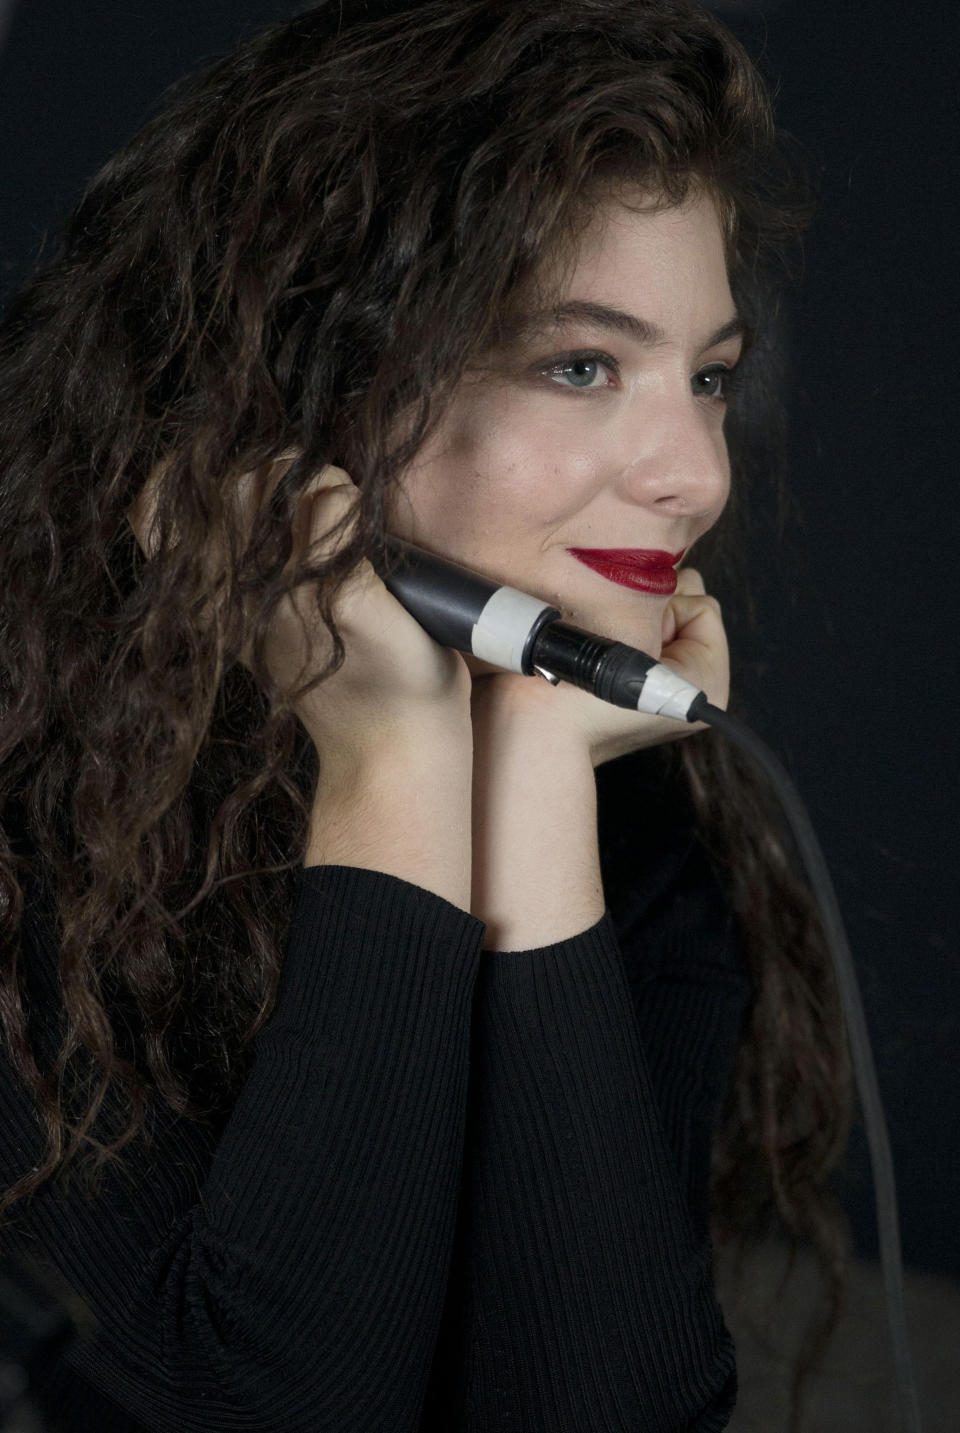 New Zealand's singer-songwriter Lorde answers questions from the press ahead of her performance in Mexico City, Mexico, Wednesday, April 9, 2014. The 17-year-old was named as a finalist in 12 categories for the Billboard Music Awards, announced on Wednesday, ahead of the May 18 awards ceremony. (AP Photo/Rebecca Blackwell)